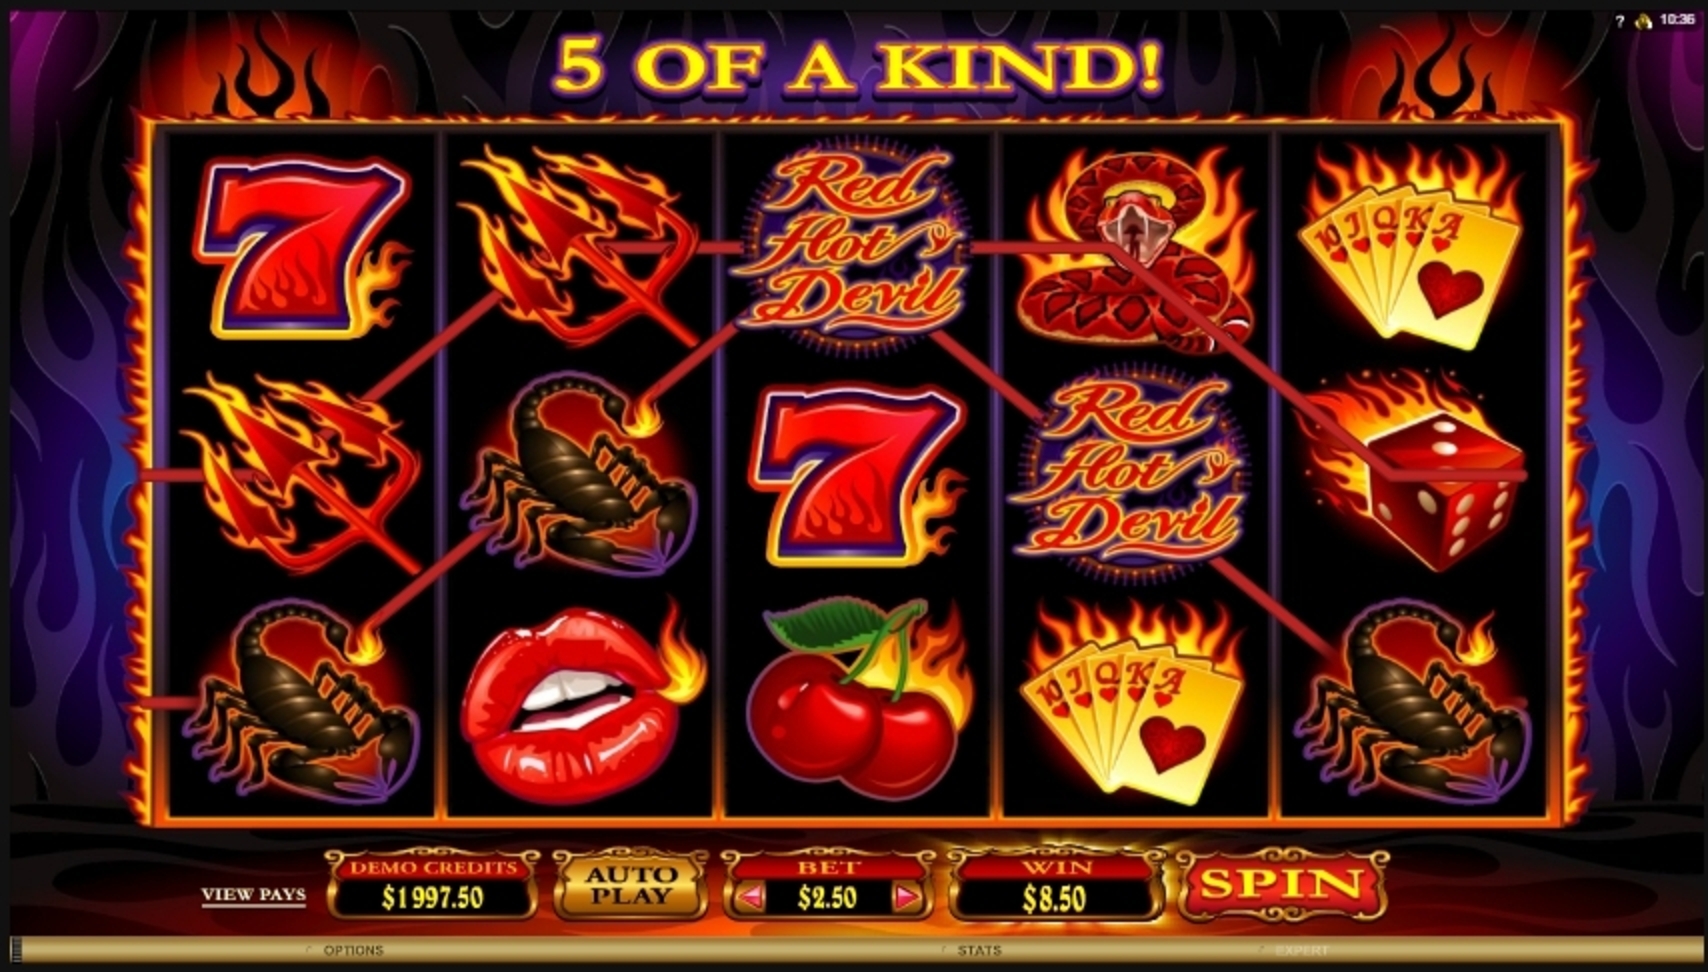 Win Money in Red Hot Devil Free Slot Game by Microgaming